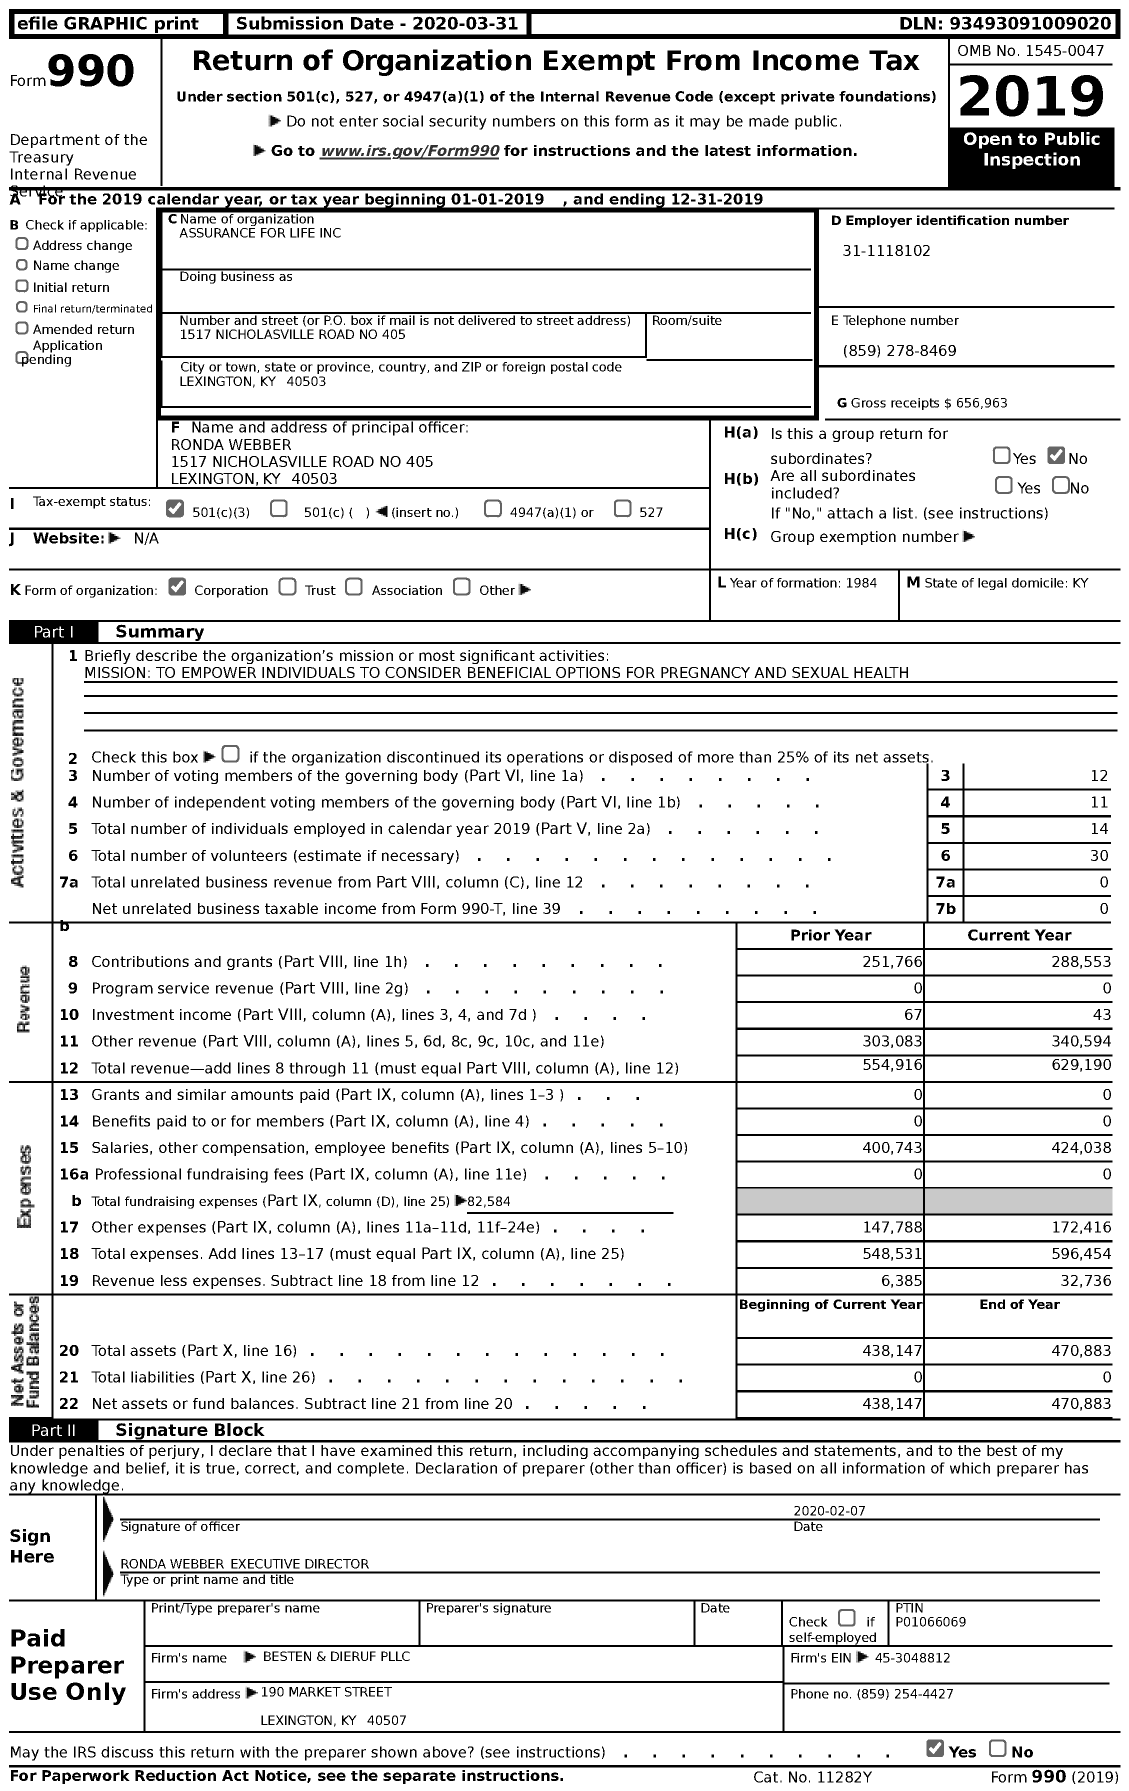 Image of first page of 2019 Form 990 for Assurance for Life